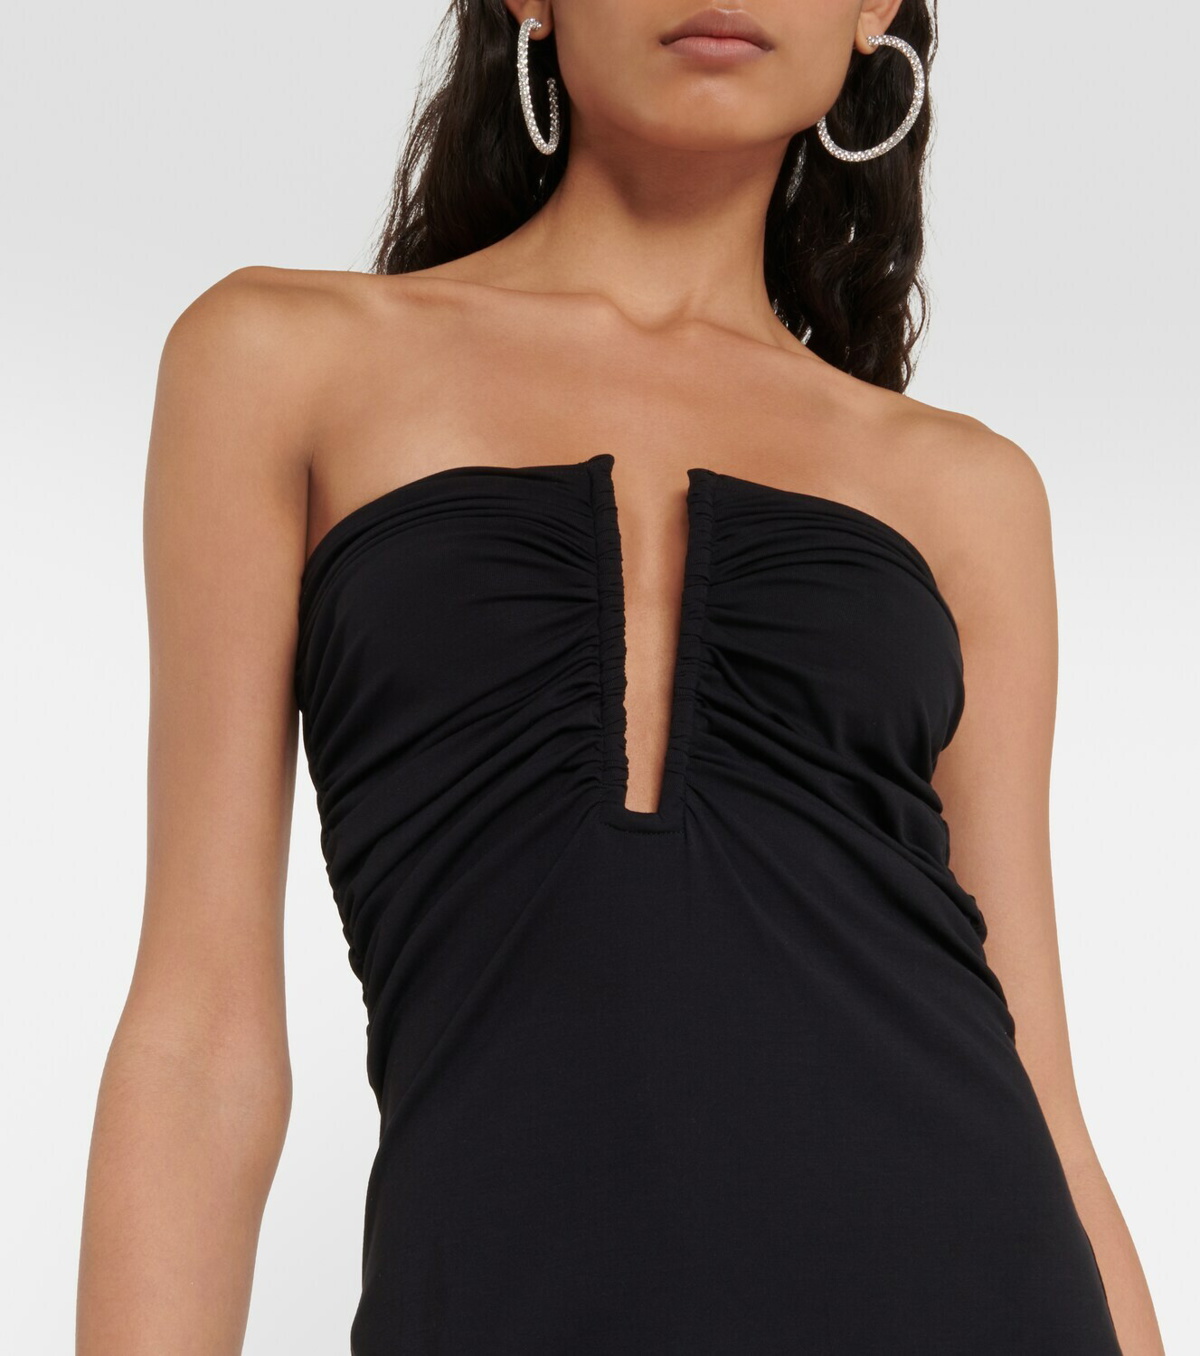 Wolford x N21 ruched strapless maxi dress